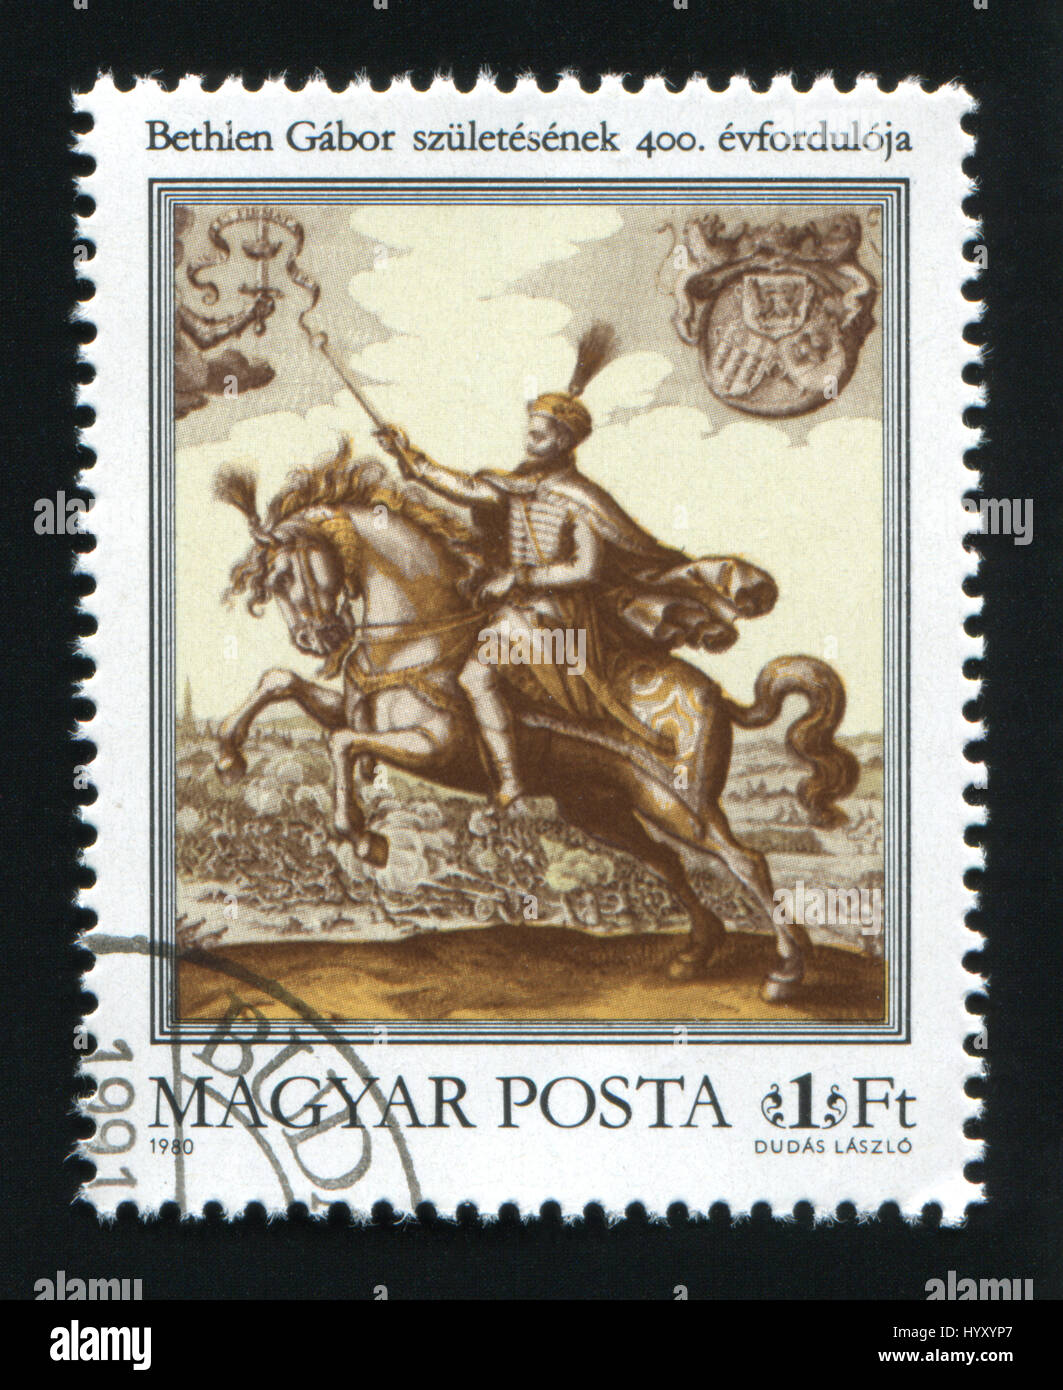 HUNGARY - CIRCA 1980: A postage stamp printed in Hungary, shows Gabor Bethlen, Copperplate Print, circa 1980. Stock Photo